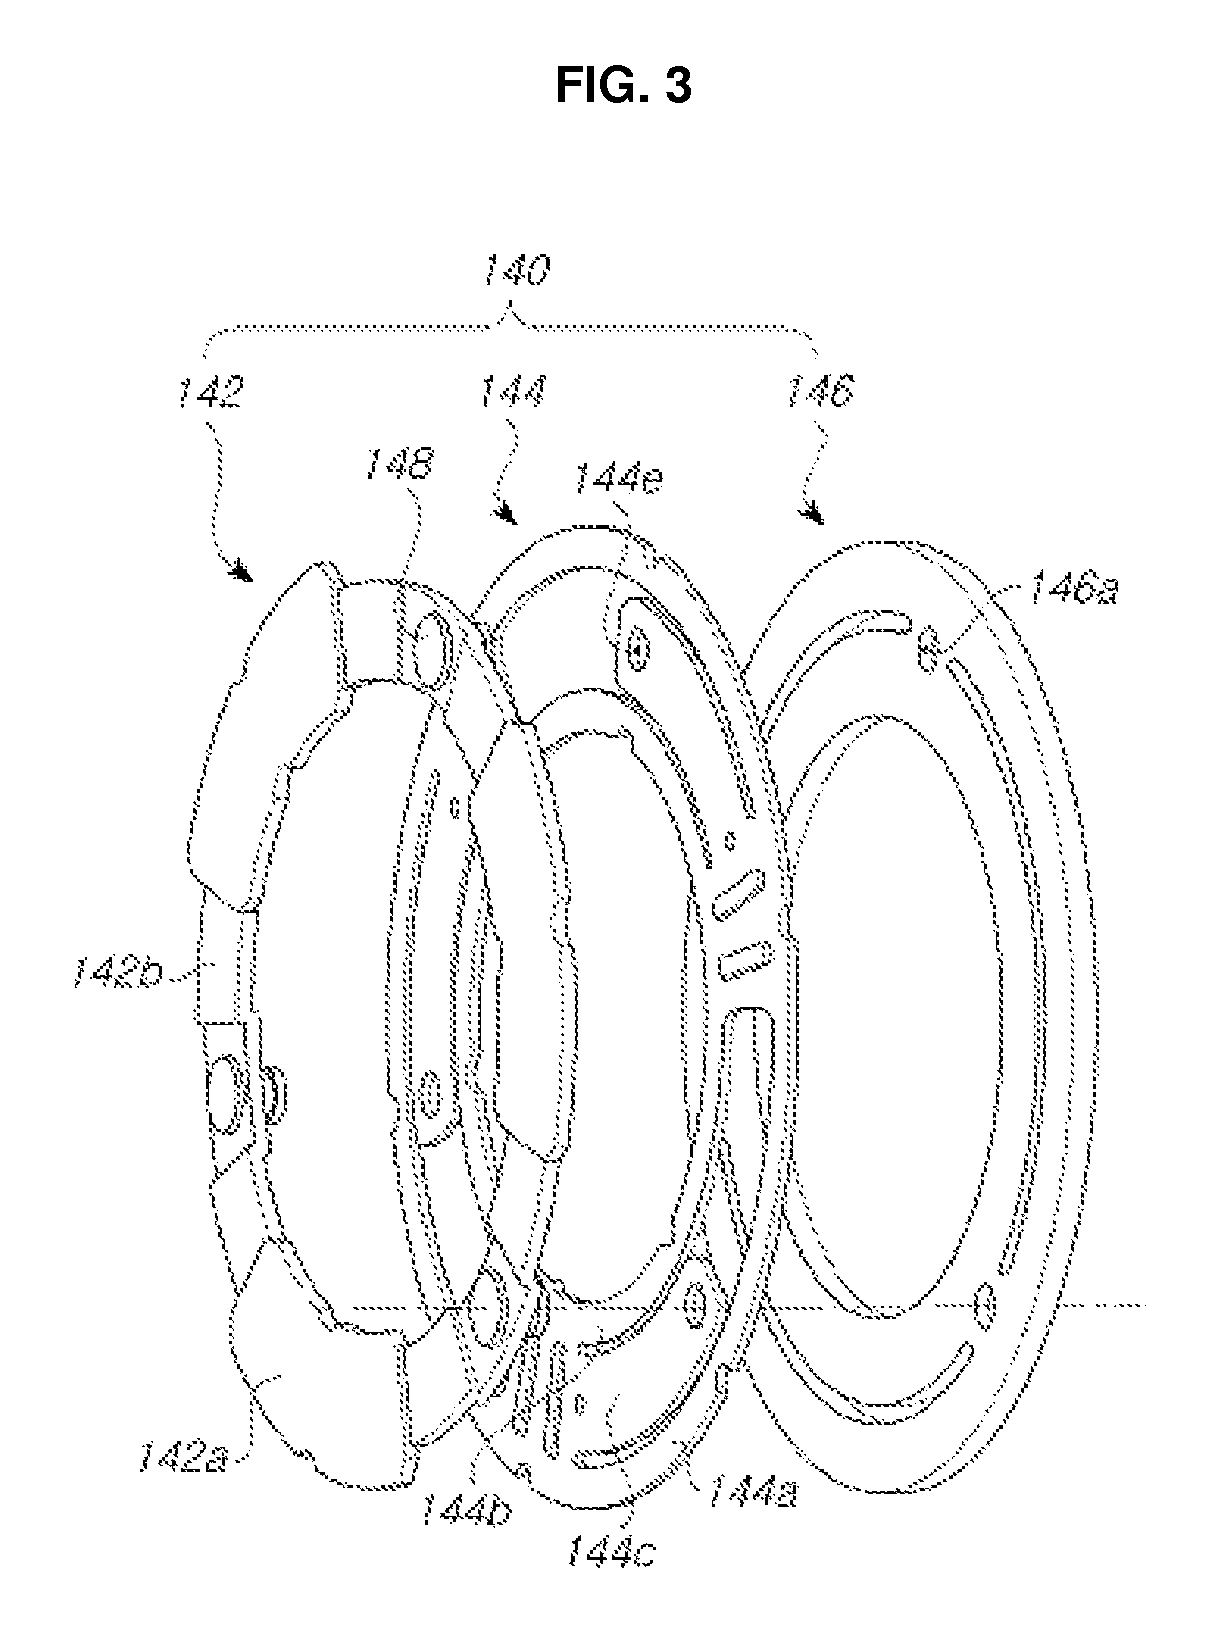 Power transmission device for a water pump